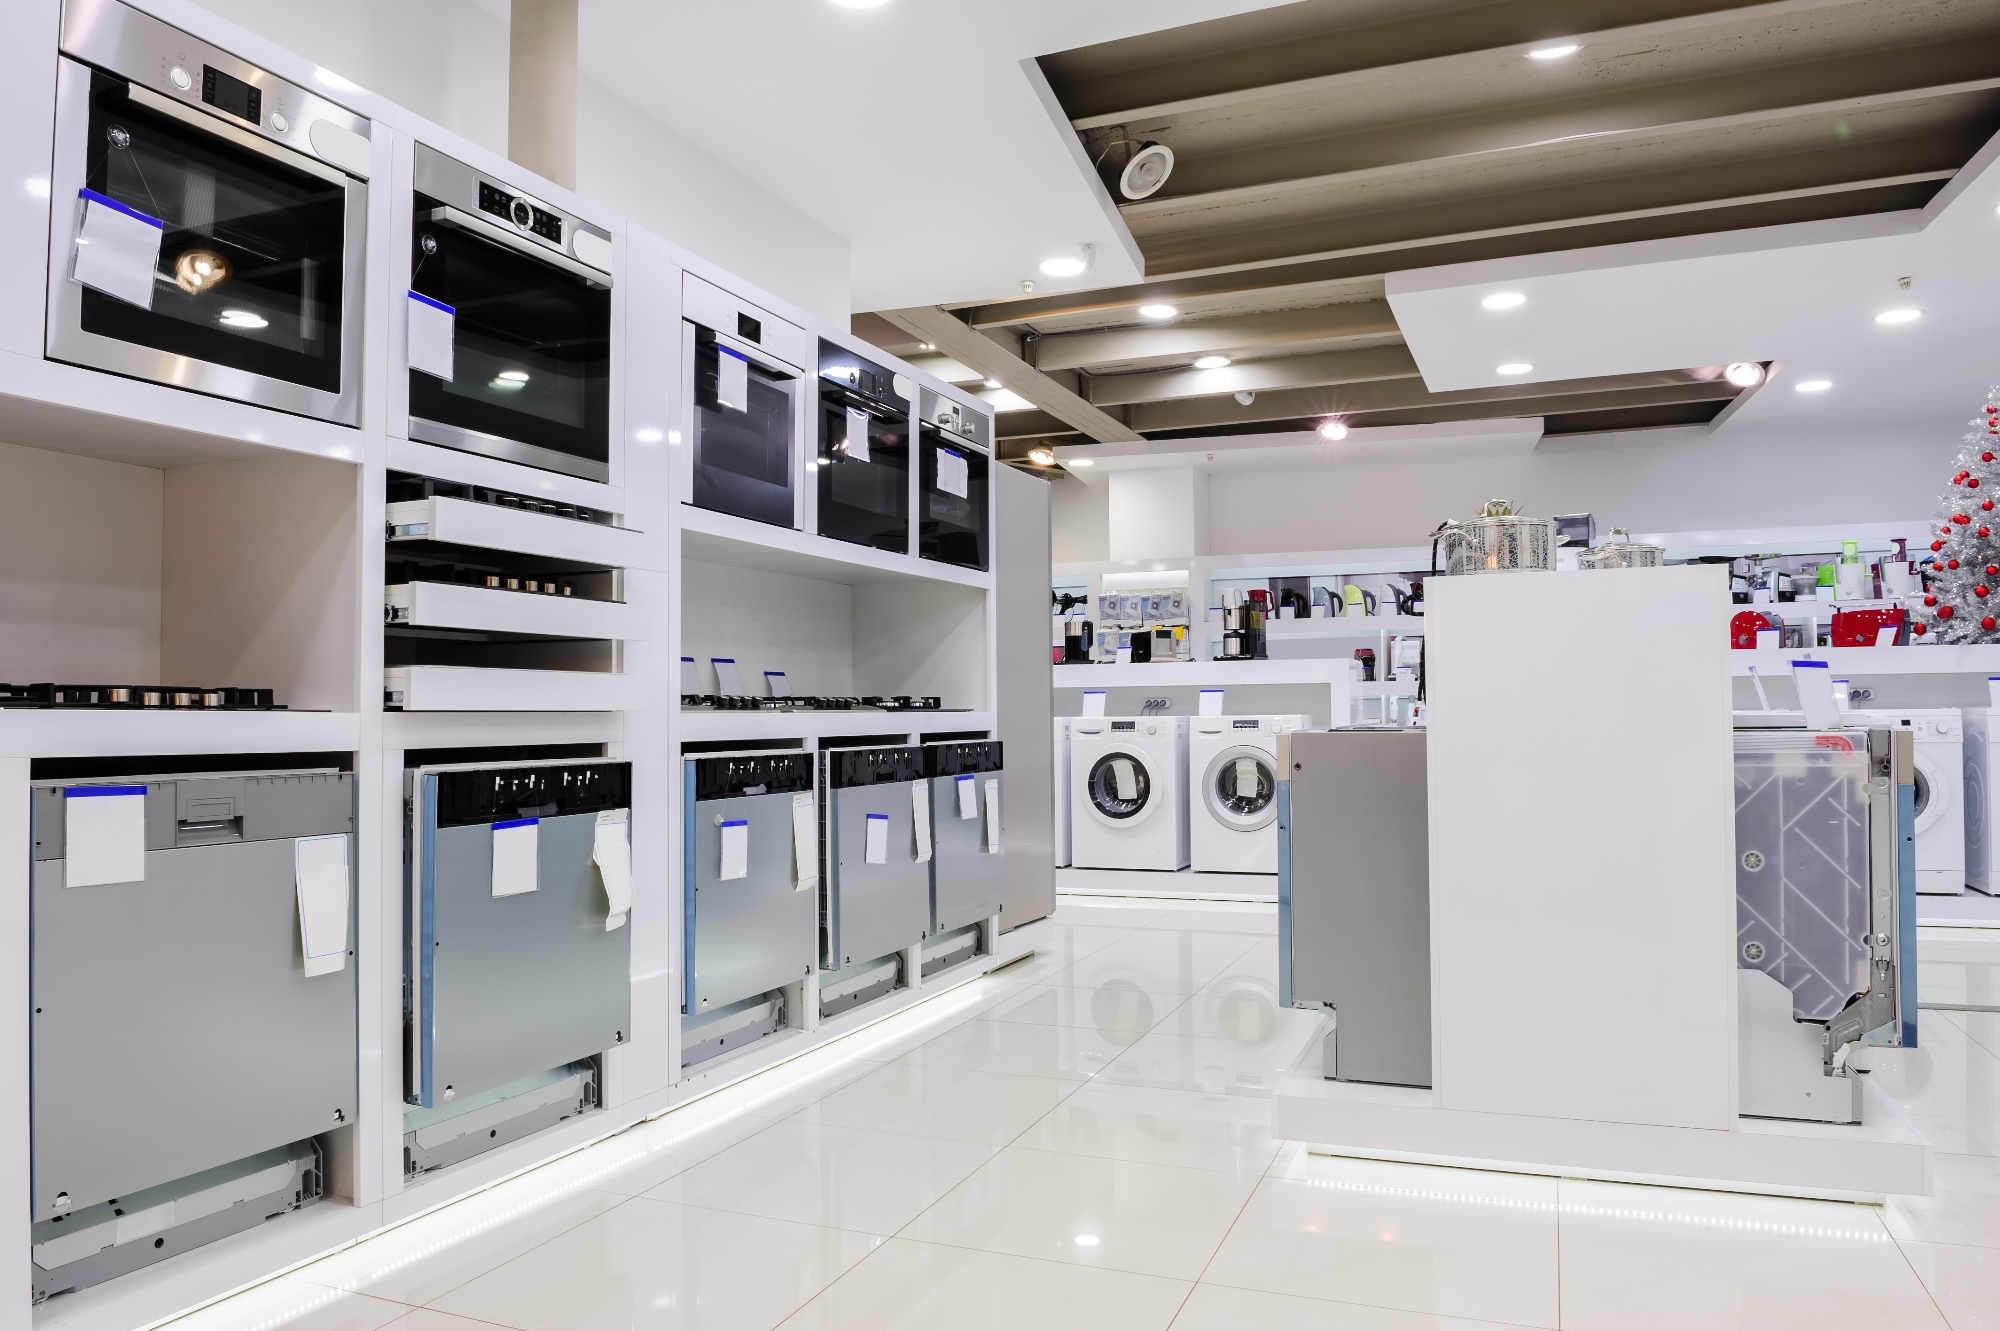 Store containing home appliances including microwaves and dishwashers